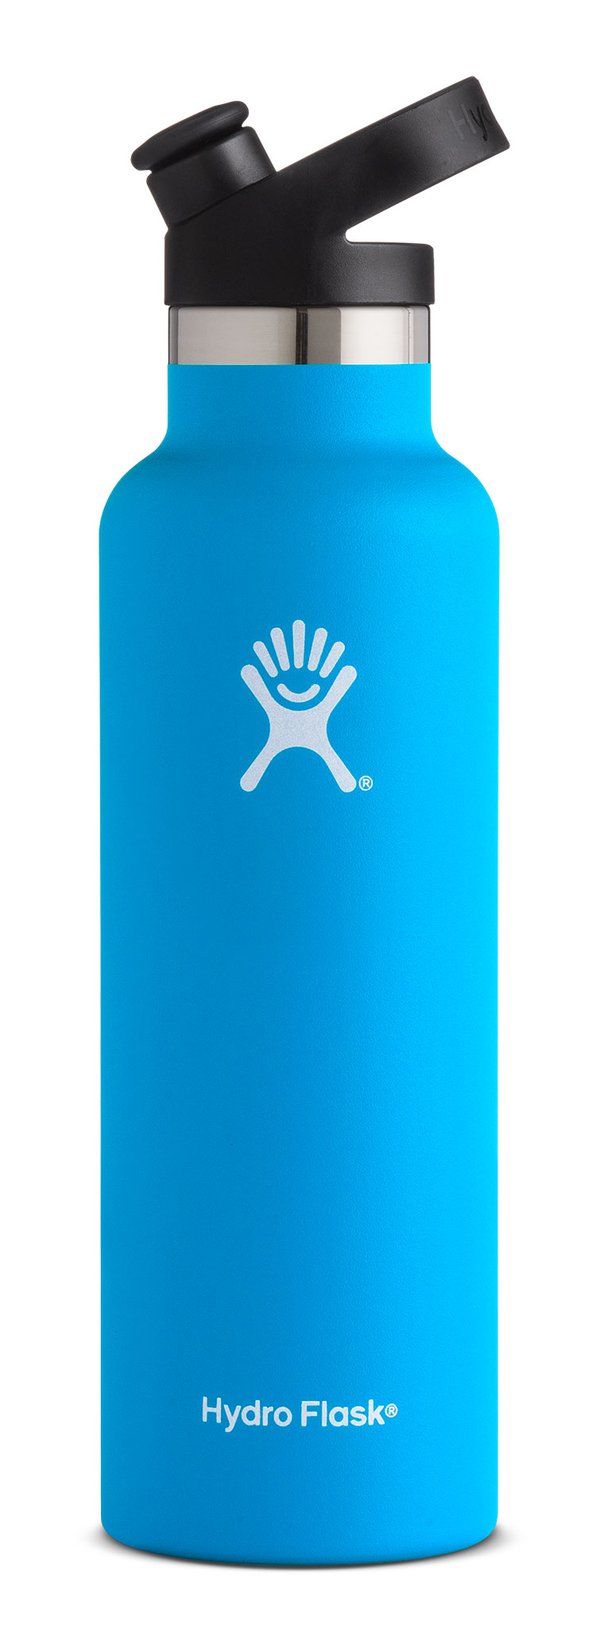 Hydro-Flask-21-oz-Standard-Mouth-with-Sport-Cap-Pacific.jpg